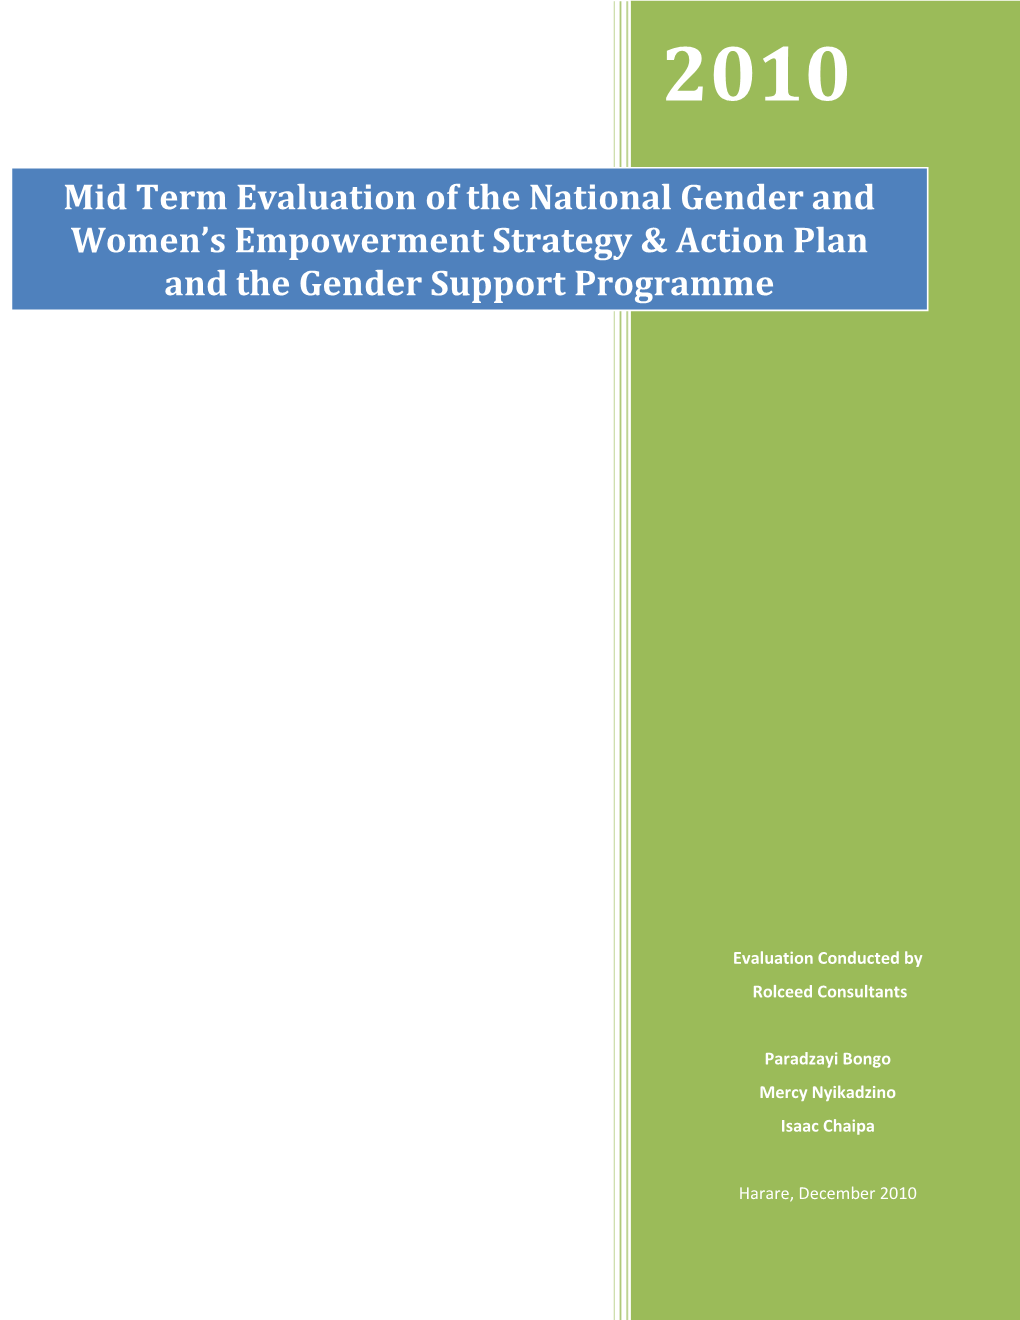 Mid Term Evaluation of the National Gender and Women's